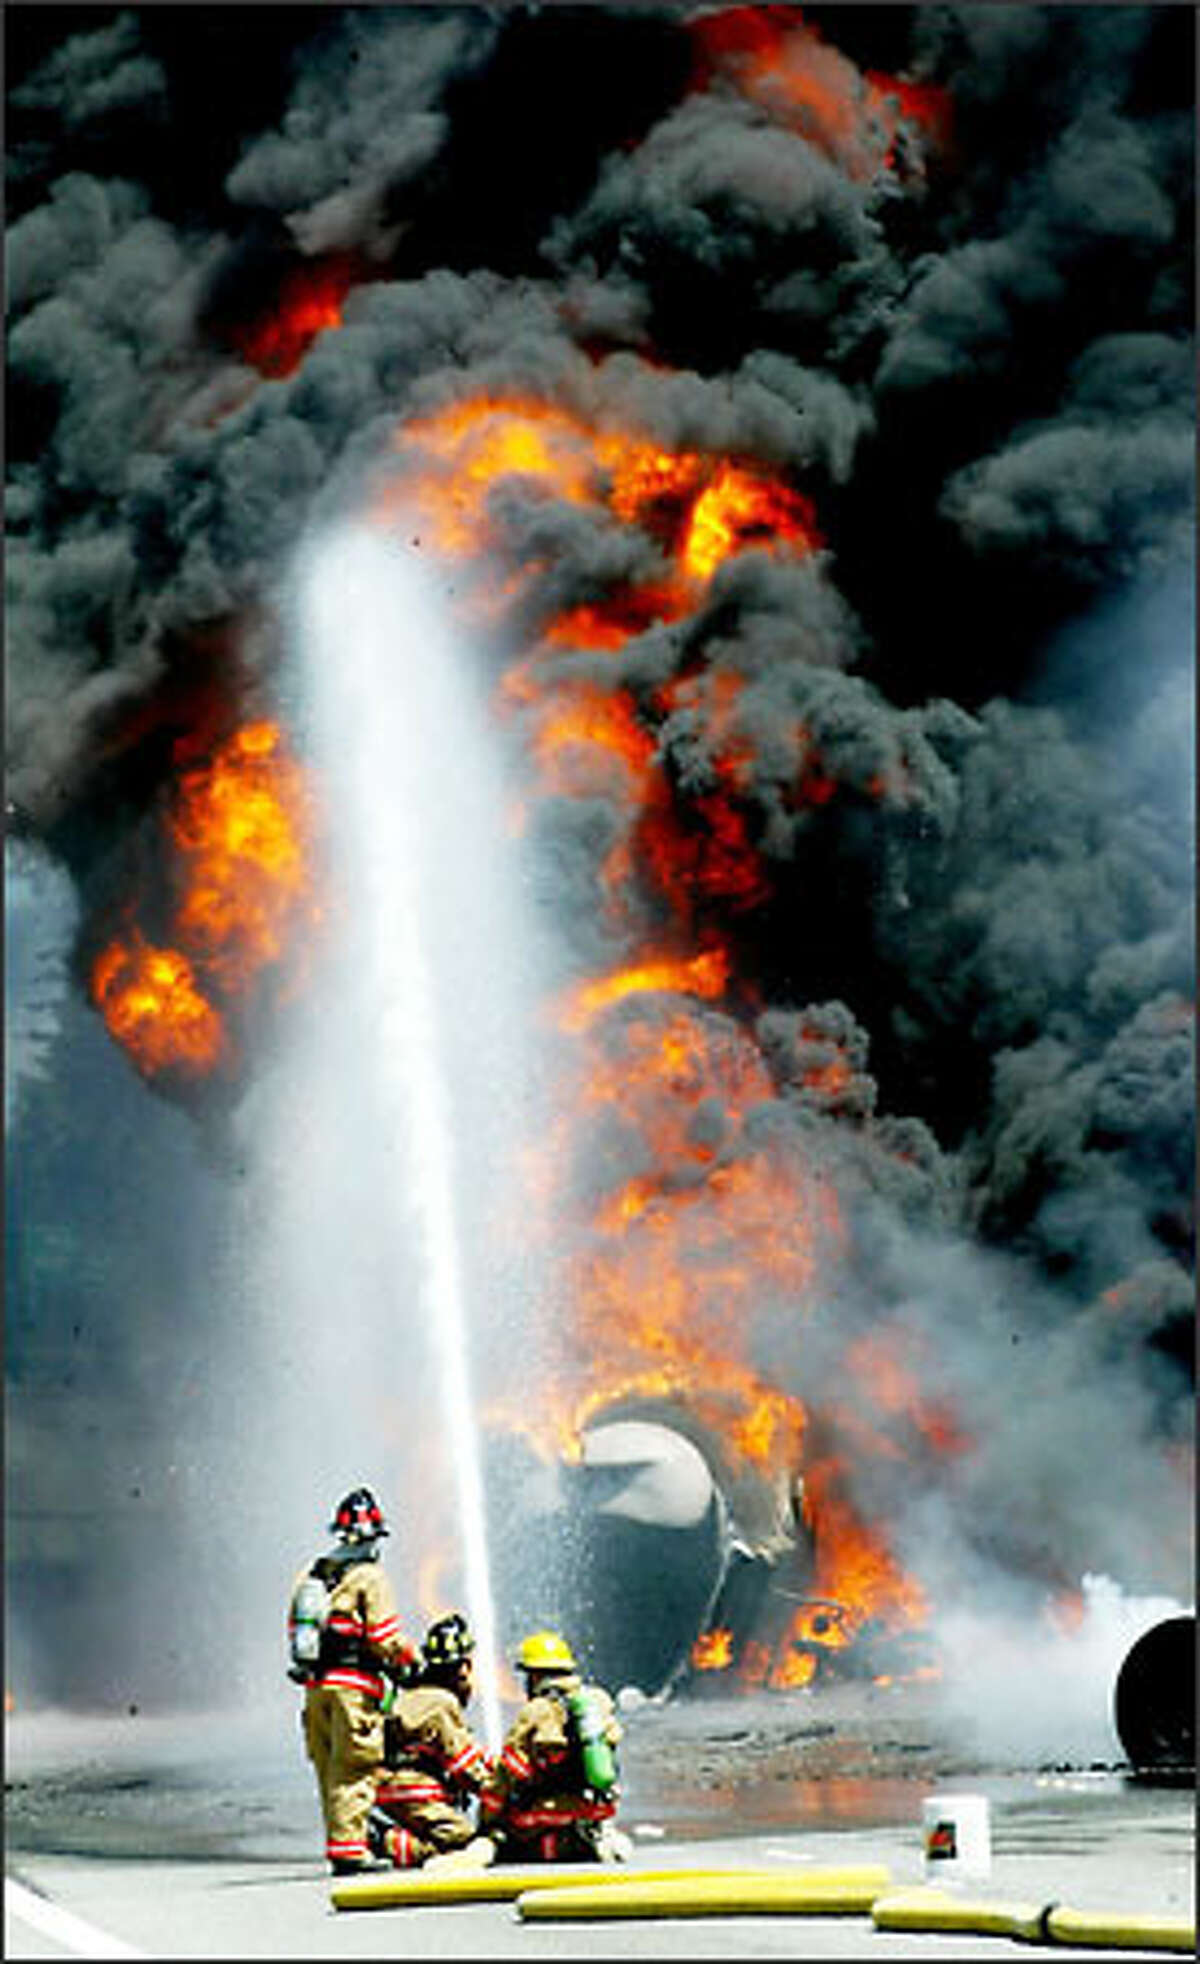 Lynnwood firefighters train a hose on flames and smoke pouring out of a burning tanker truck on an I-5 overpass in Lynnwood Saturday. The freeway was closed for hours.Haller: "I was in Edmonds on my day off when I noticed a huge black column of smoke soaring high over Lynnwood. A fuel truck had crashed and caught fire in the northbound lanes of I-5 over 44th Avenue West. I was amazed that it was still burning by the time I found a way to get on I-5 and photograph members of the Lynnwood Fire Department trying to knock down the flames. After units from Boeing's Paine Field fire department in Everett arrived and smothered the flames with foam and the fire was out, I was ordered to move back by a Washington State Patrol officer."